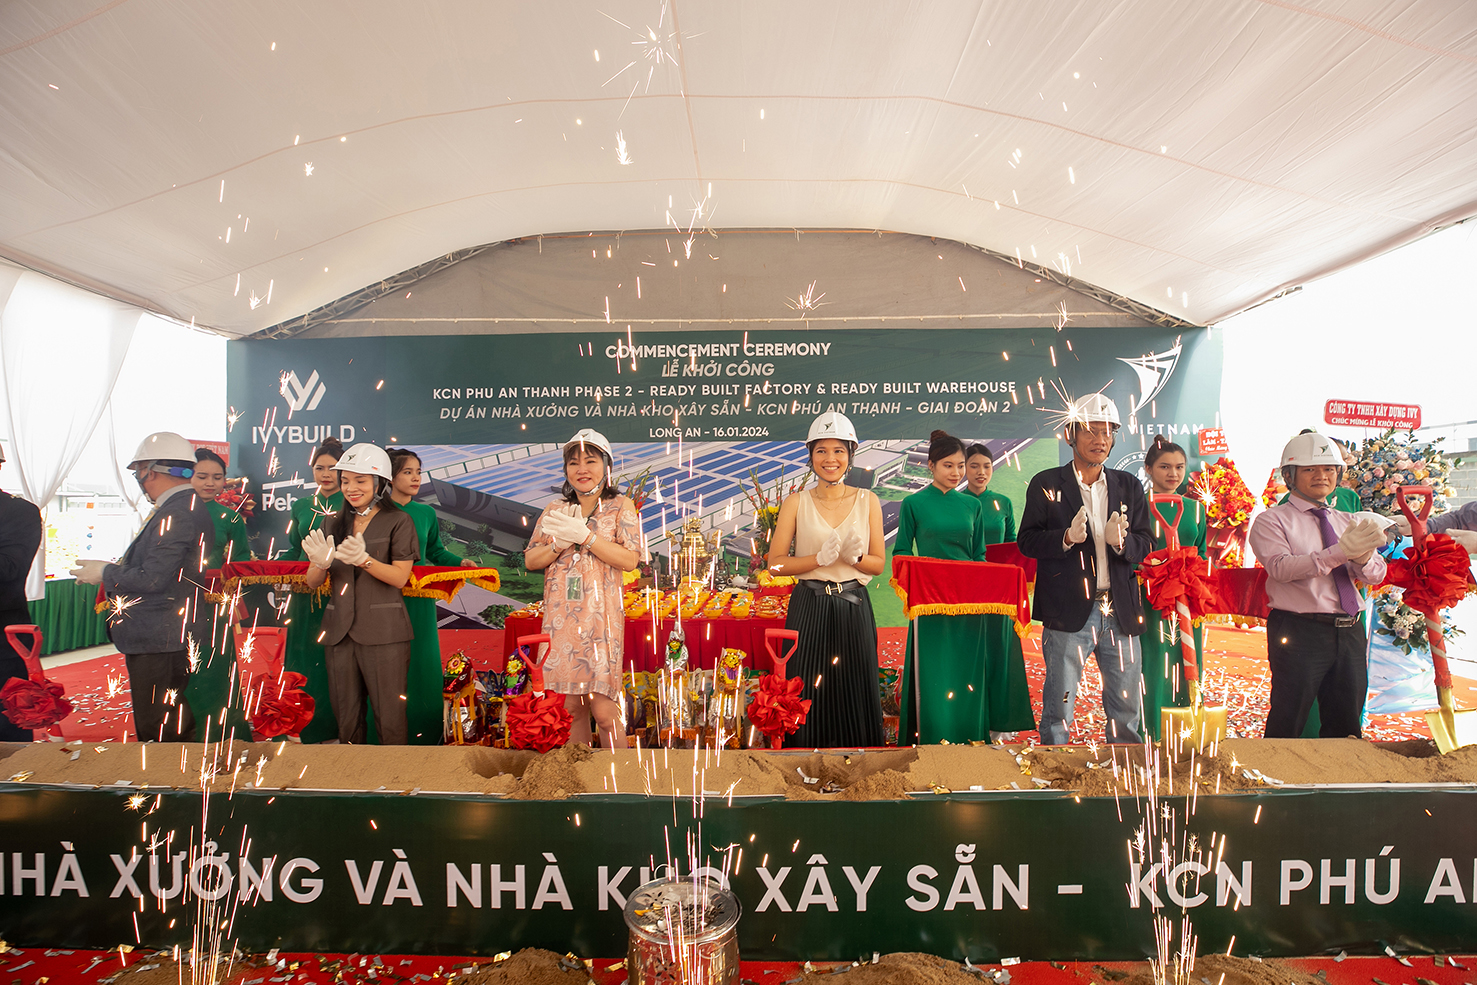 KCN VIETNAM COMMENCES ITS SECOND PHASE OF KCN PHU AN THANH, LONG AN